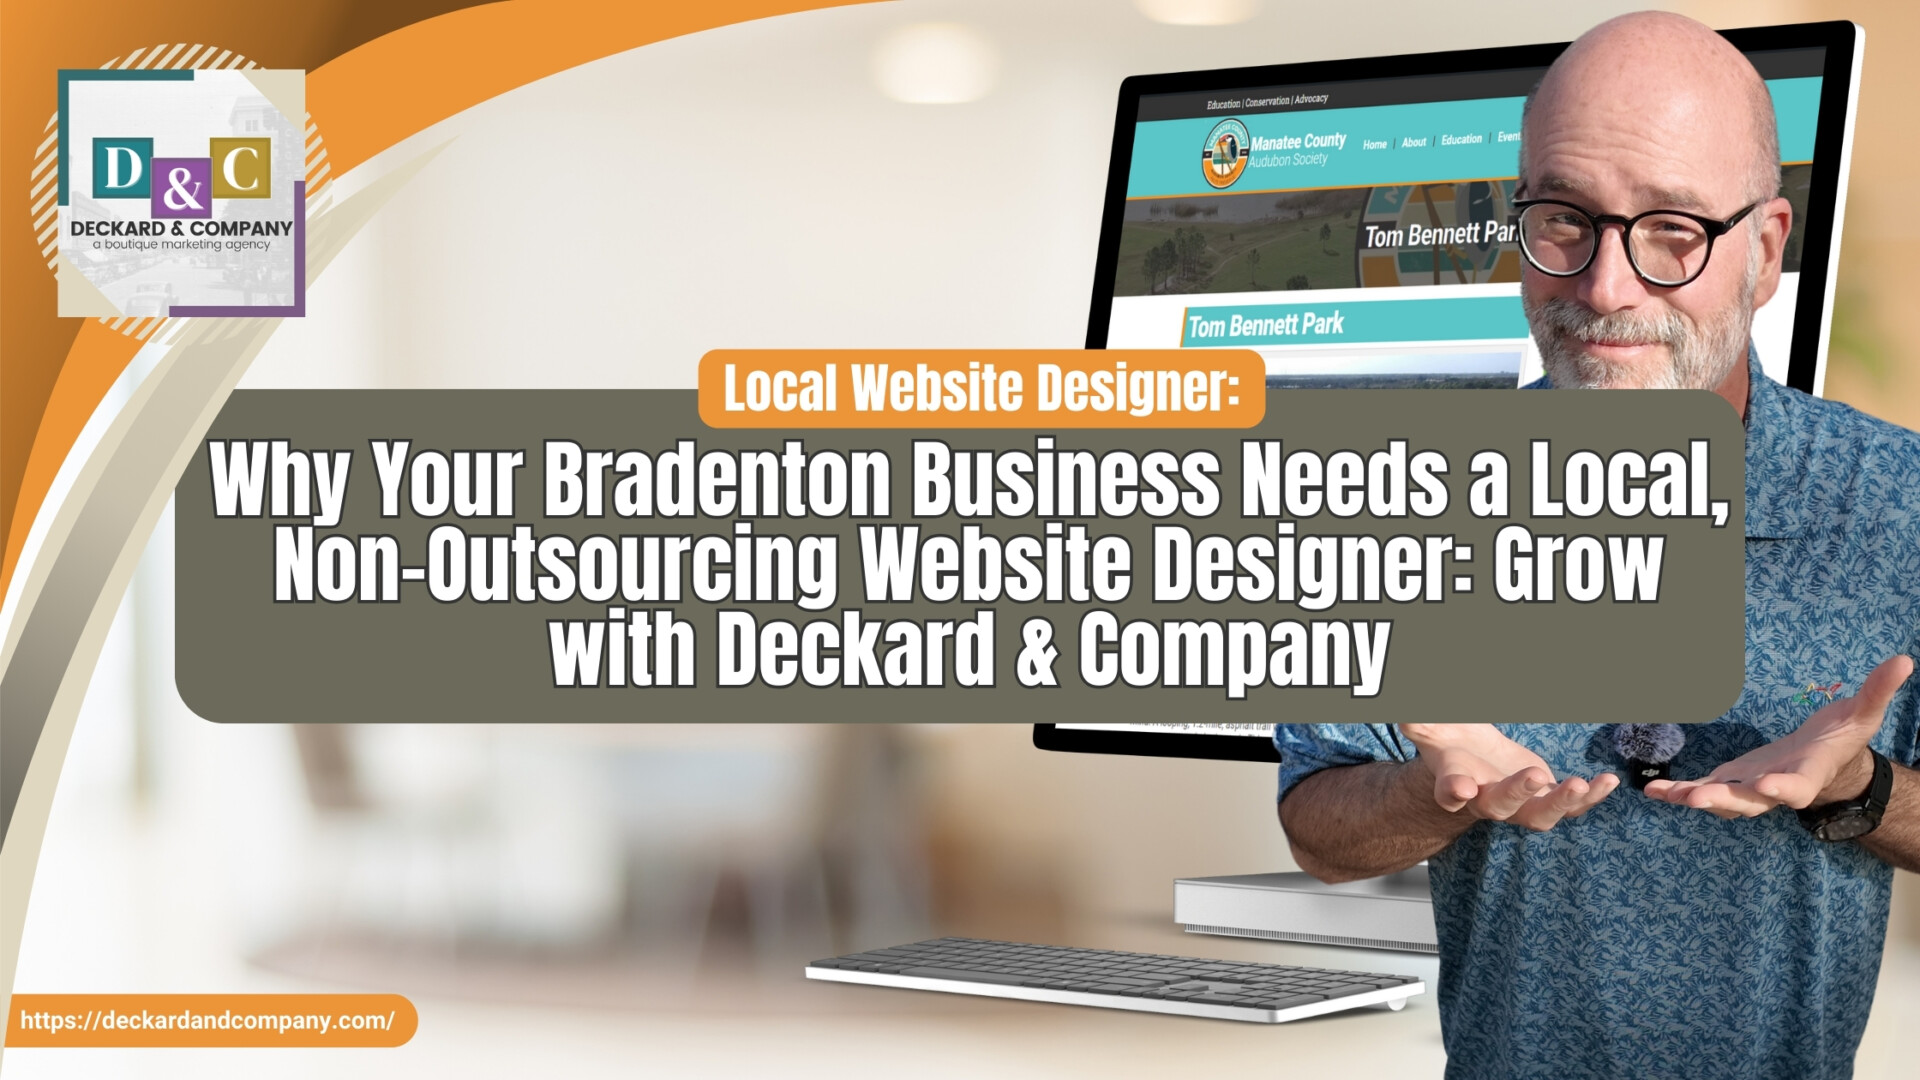 Why Your Bradenton Business Needs a Local, Non-Outsourcing Website Designer Grow with Deckard & Company